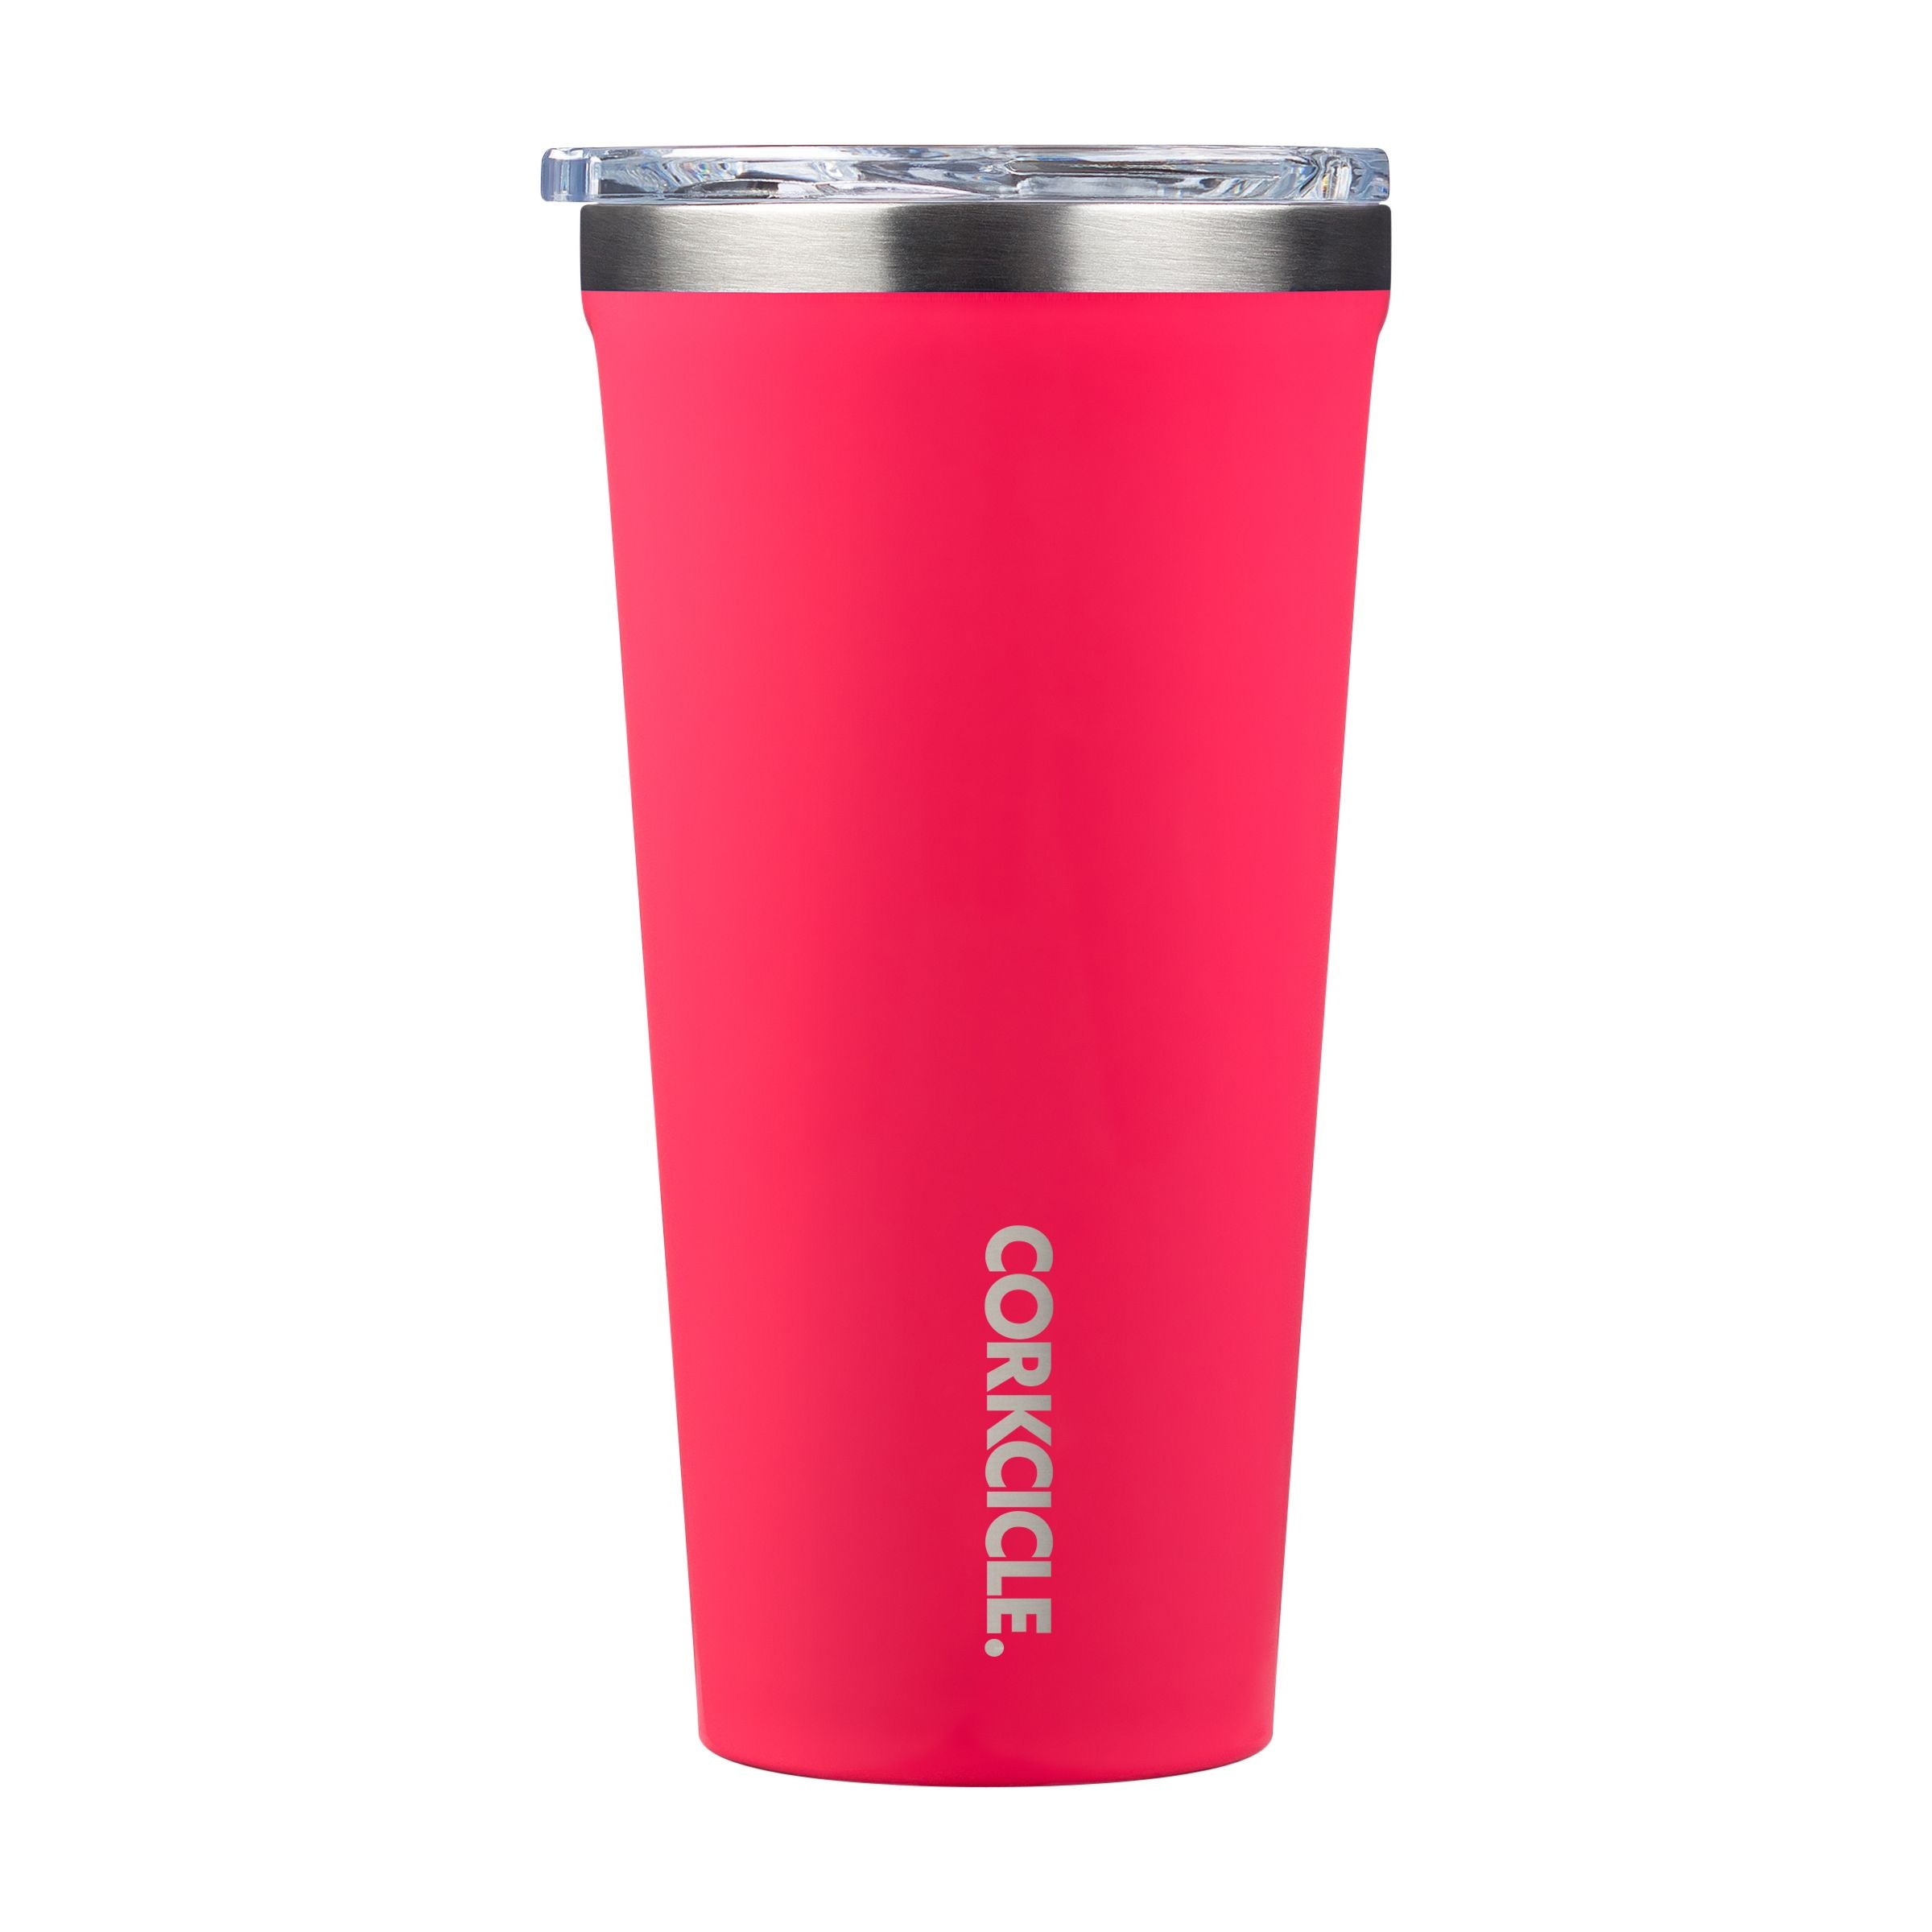 Corkcicle tumbler 24 oz gloss orchid